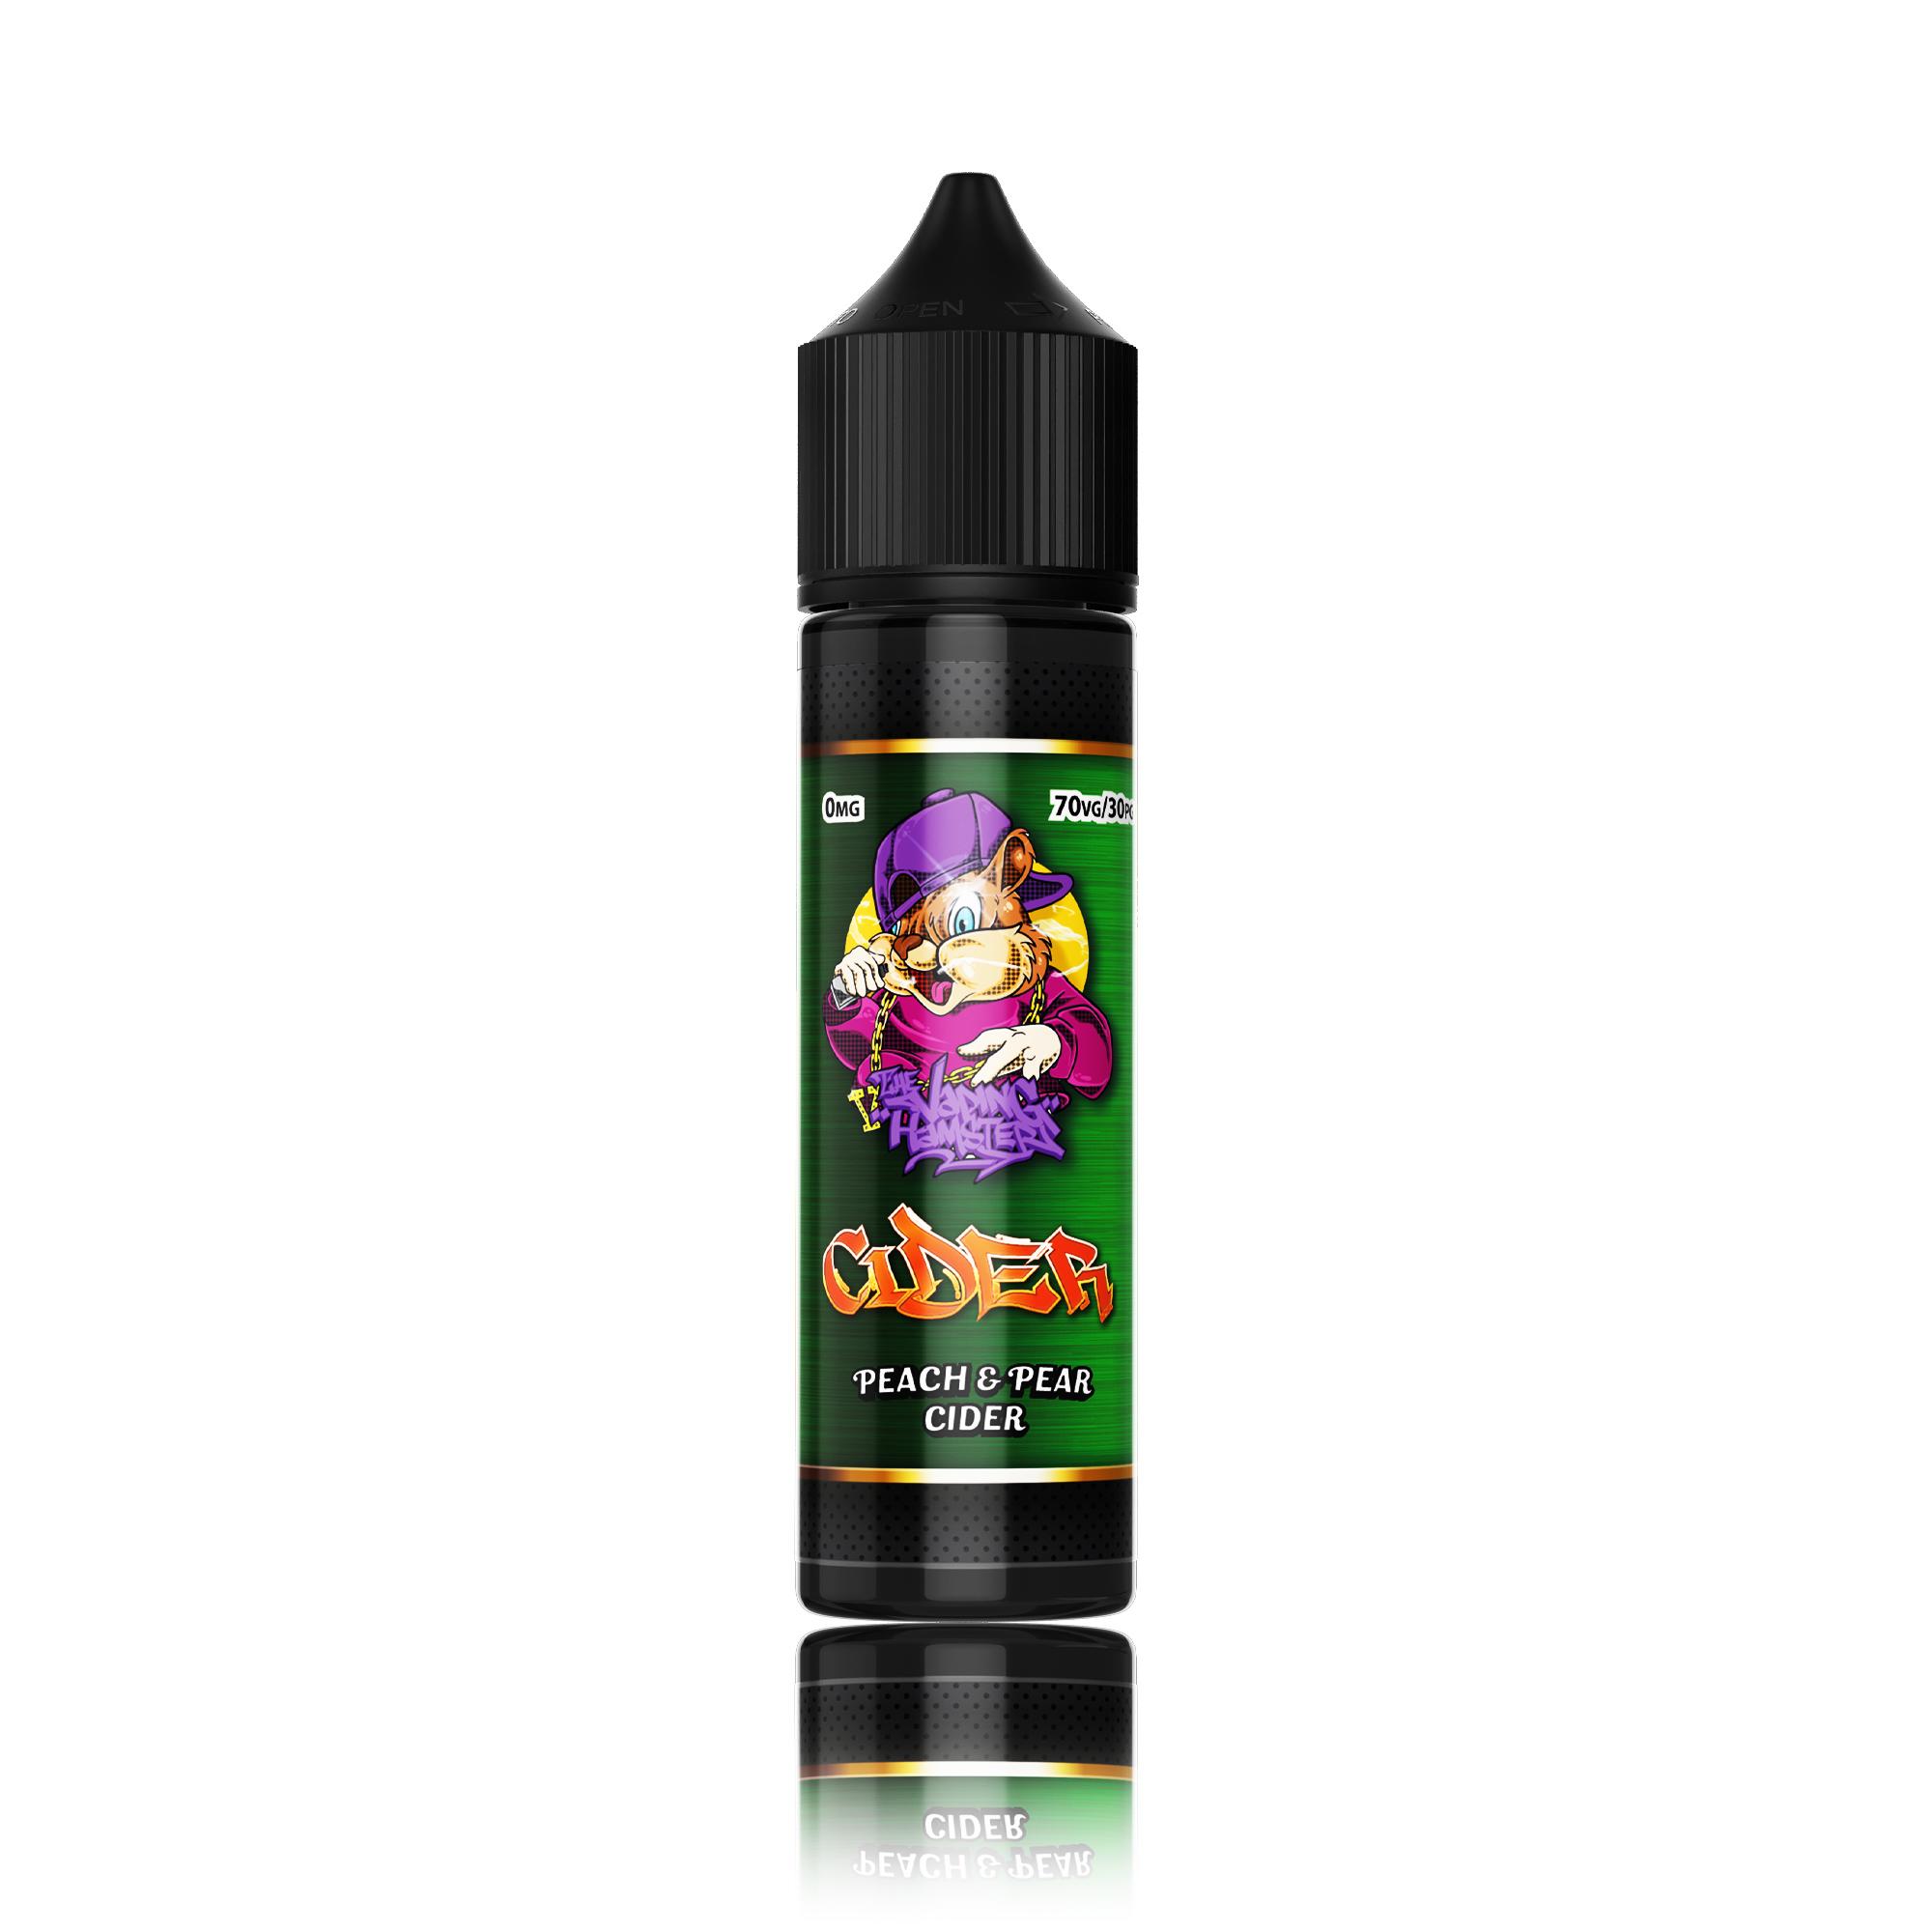 Peach & Pear Cider by The Vaping Hamster E-Liquid